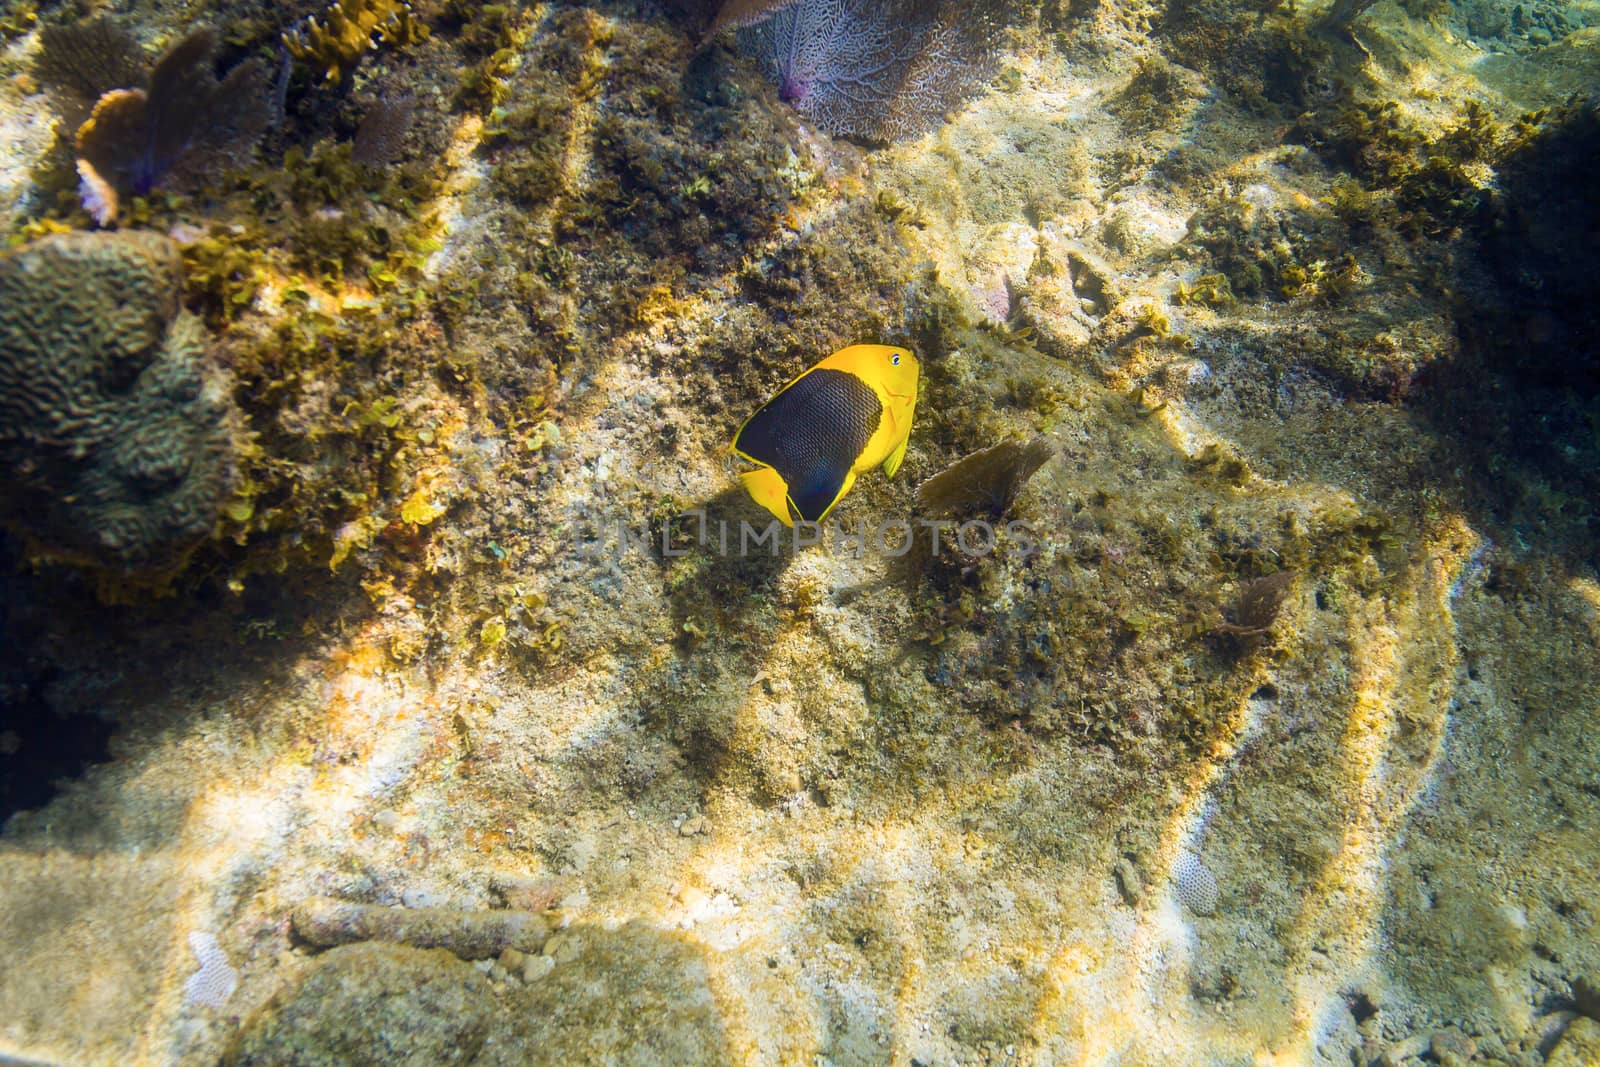 Holacanthus tricolor feed on a coral reef rock